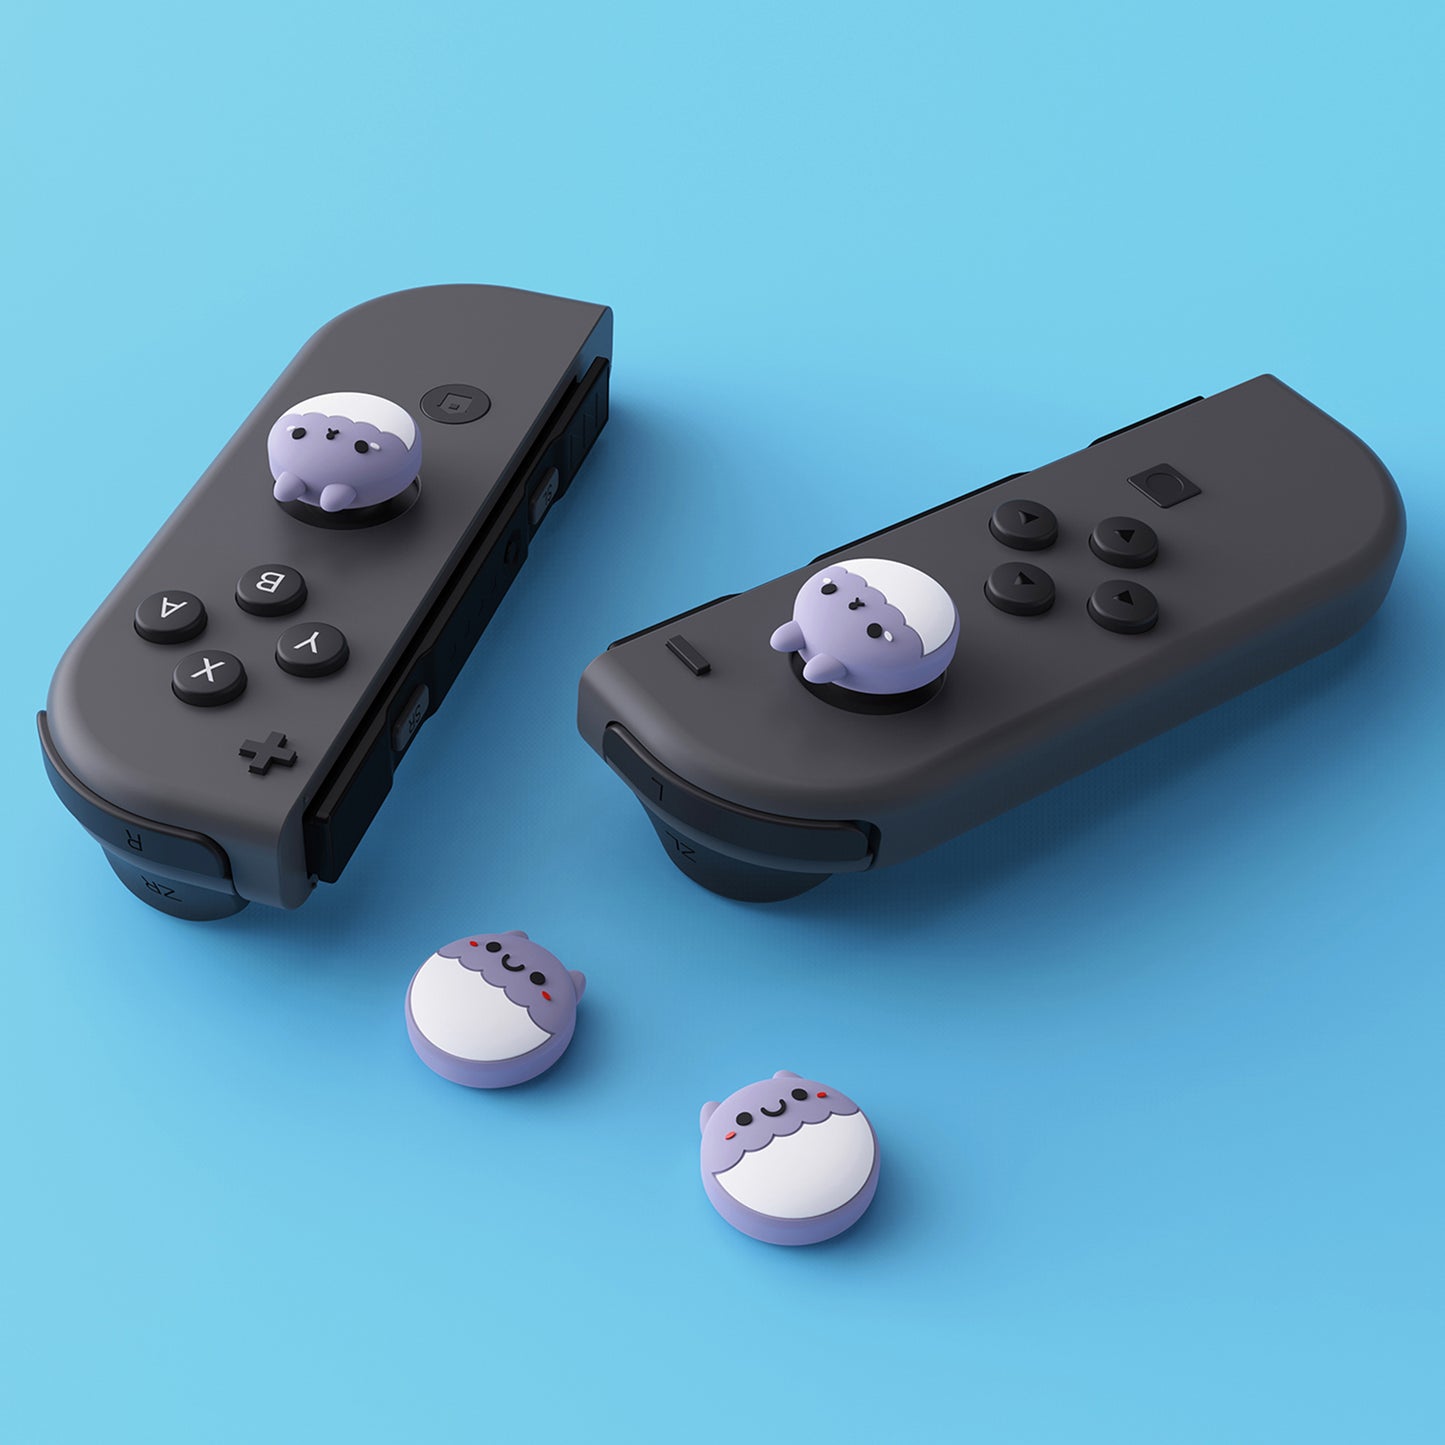 PlayVital Rabbit & Squirrel Cute Thumb Grip Caps for Nintendo Switch, Joystick Caps for Nintendo Switch Lite, Analog Cover Thumbstick Grips for OLED Joycon - Light Violet - NJM1120 playvital